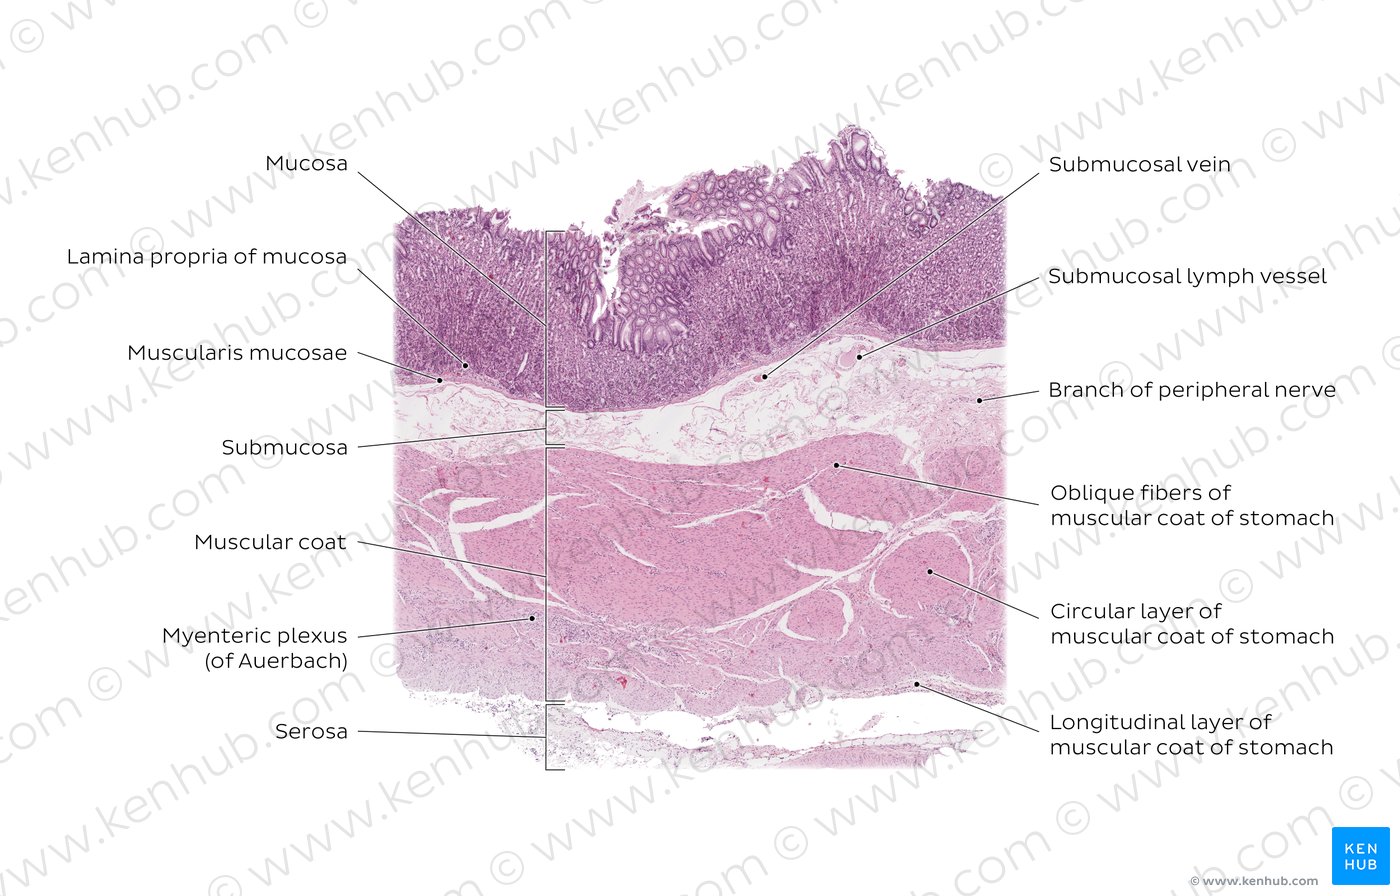 Upper digestive tract: Histology and clinical aspects | Kenhub